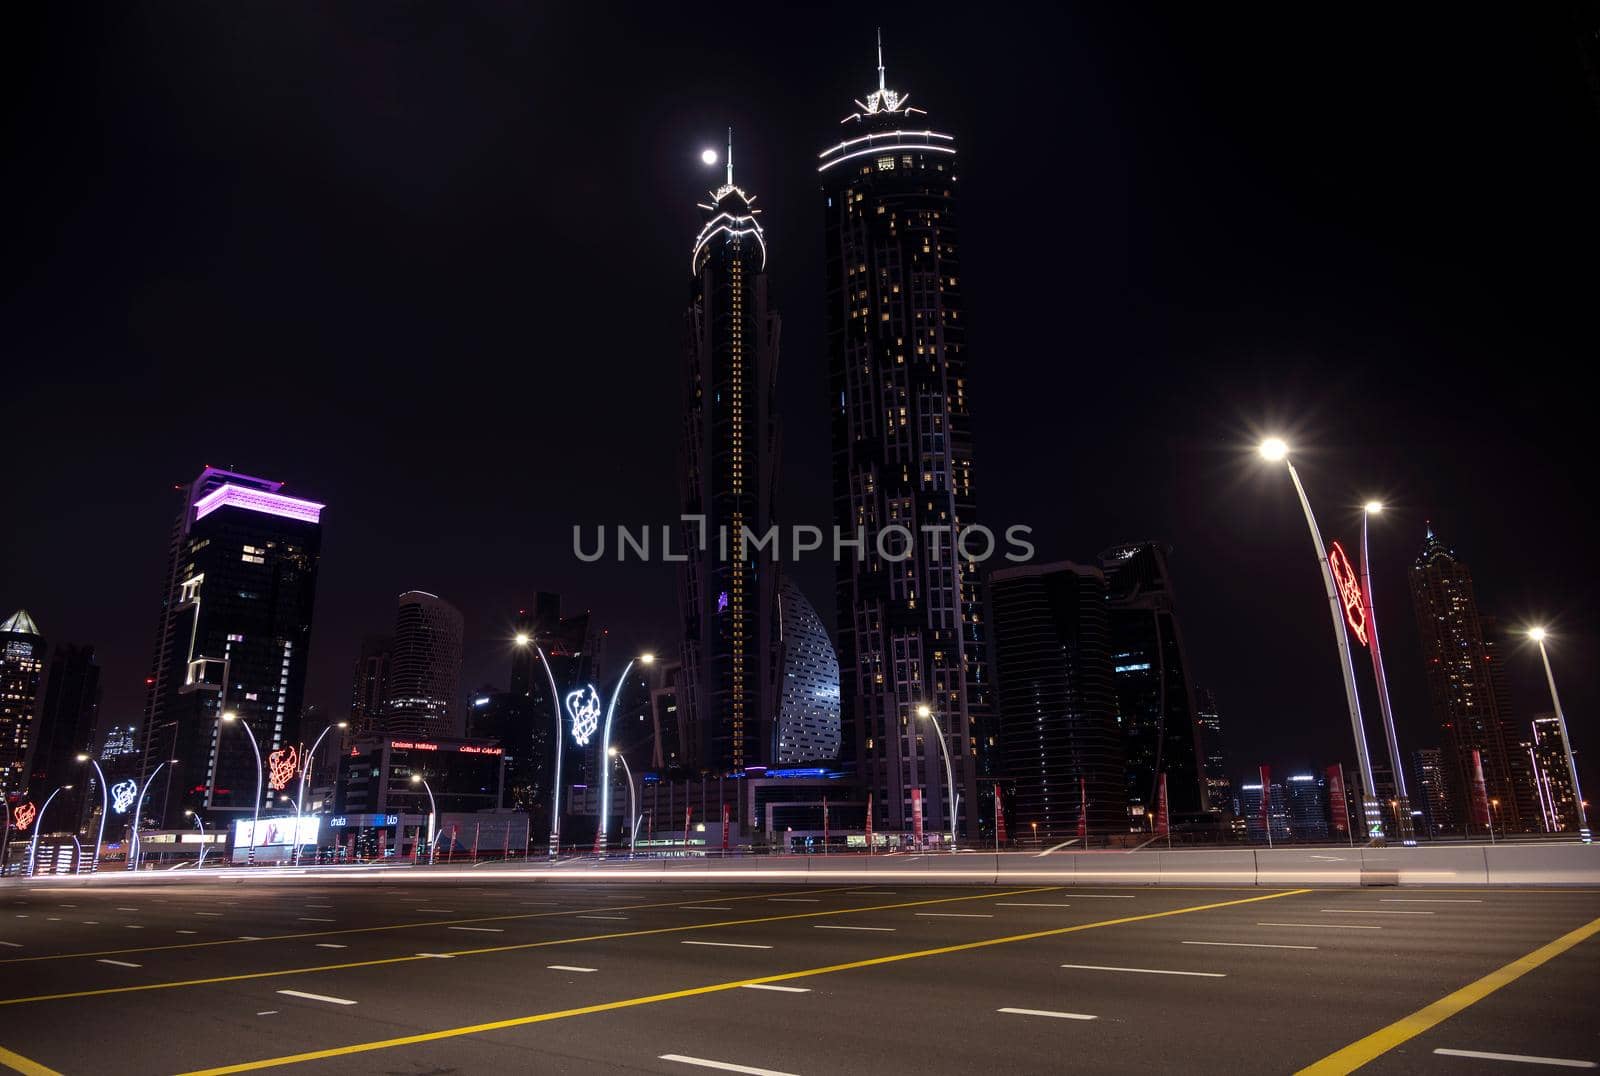 1ST jan 2021, Dubai , UAE.Moving traffic on the busy road with JW Marriott hotel and other sky scrappers in the background on a moonlit night captured at Dubai, UAE.